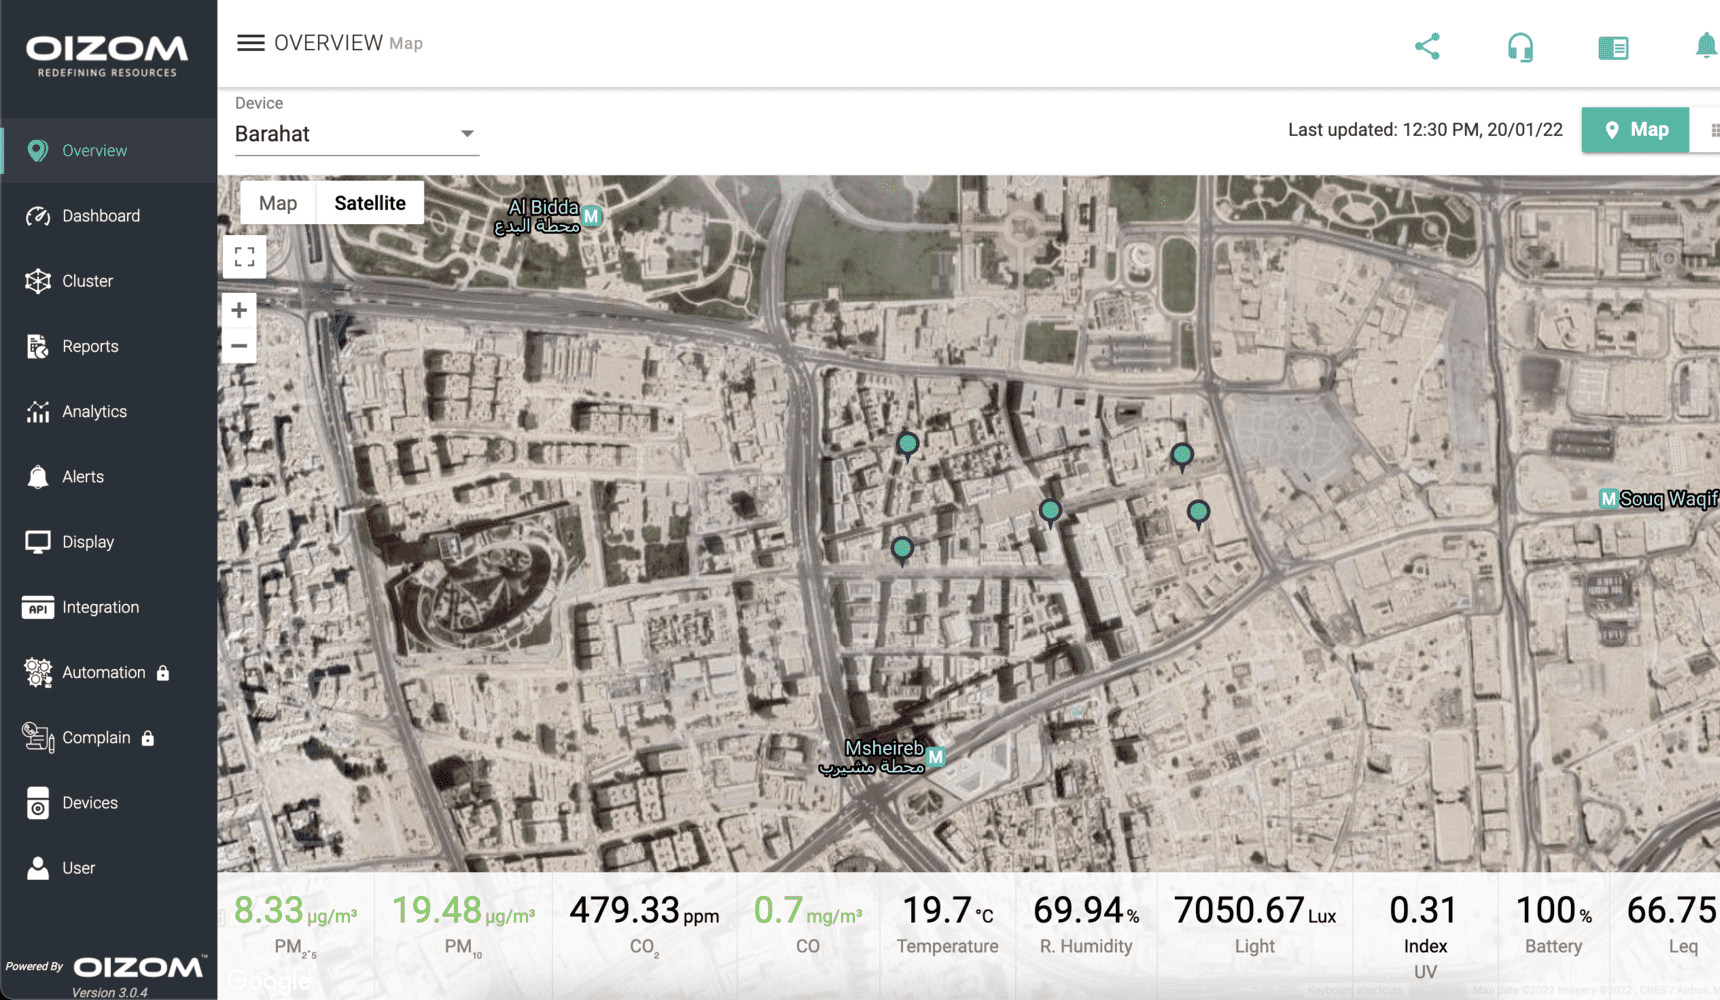 Satellite image of the Air quality monitoring system in Doha